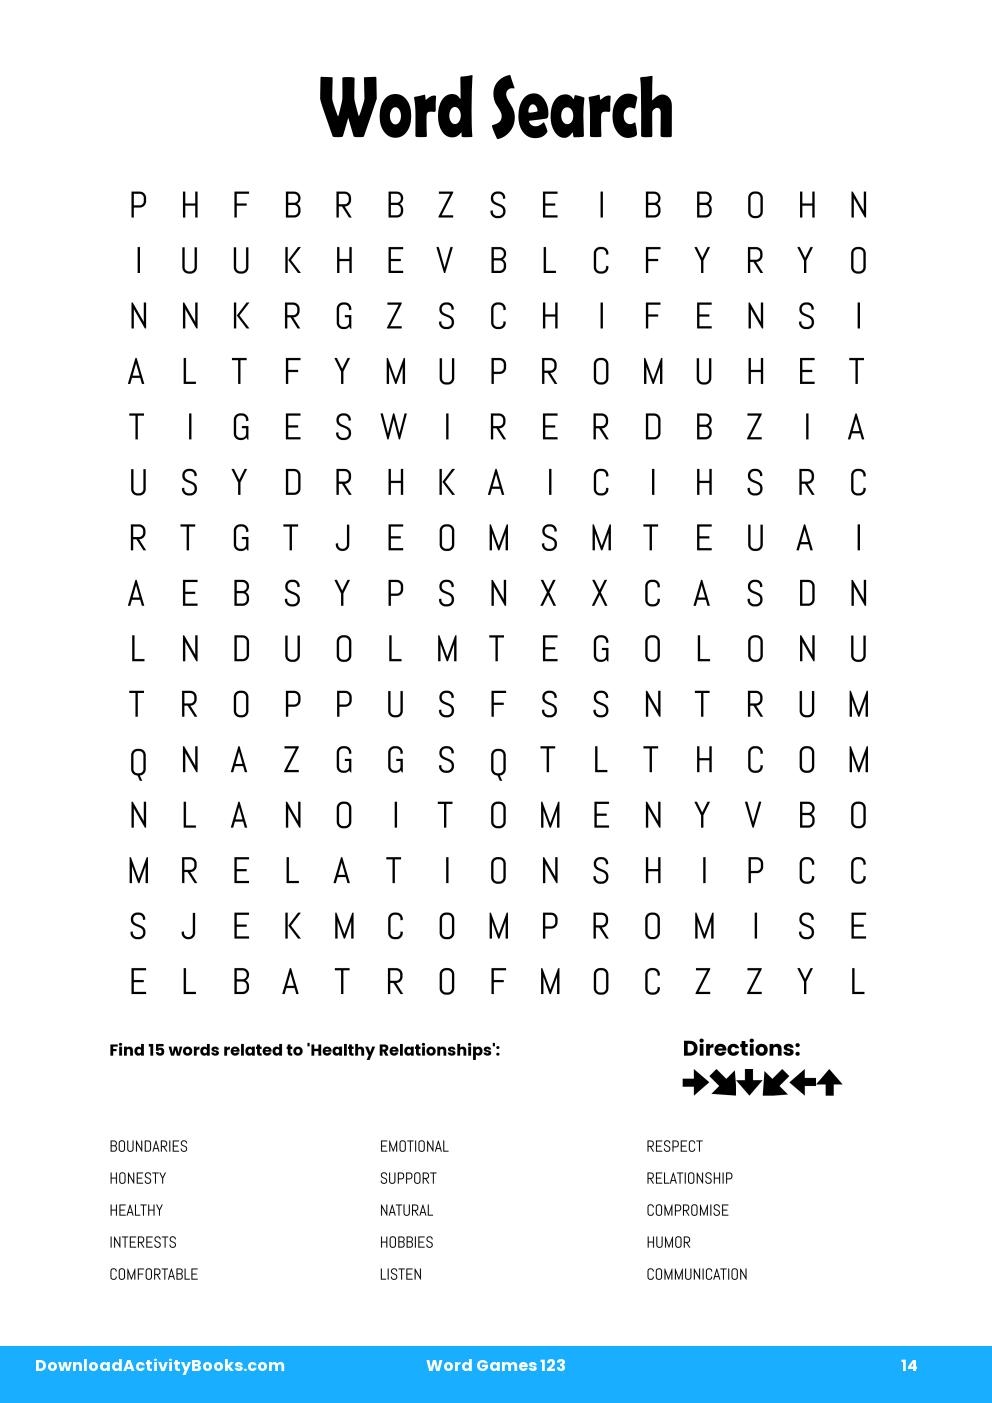 Word Search in Word Games 123